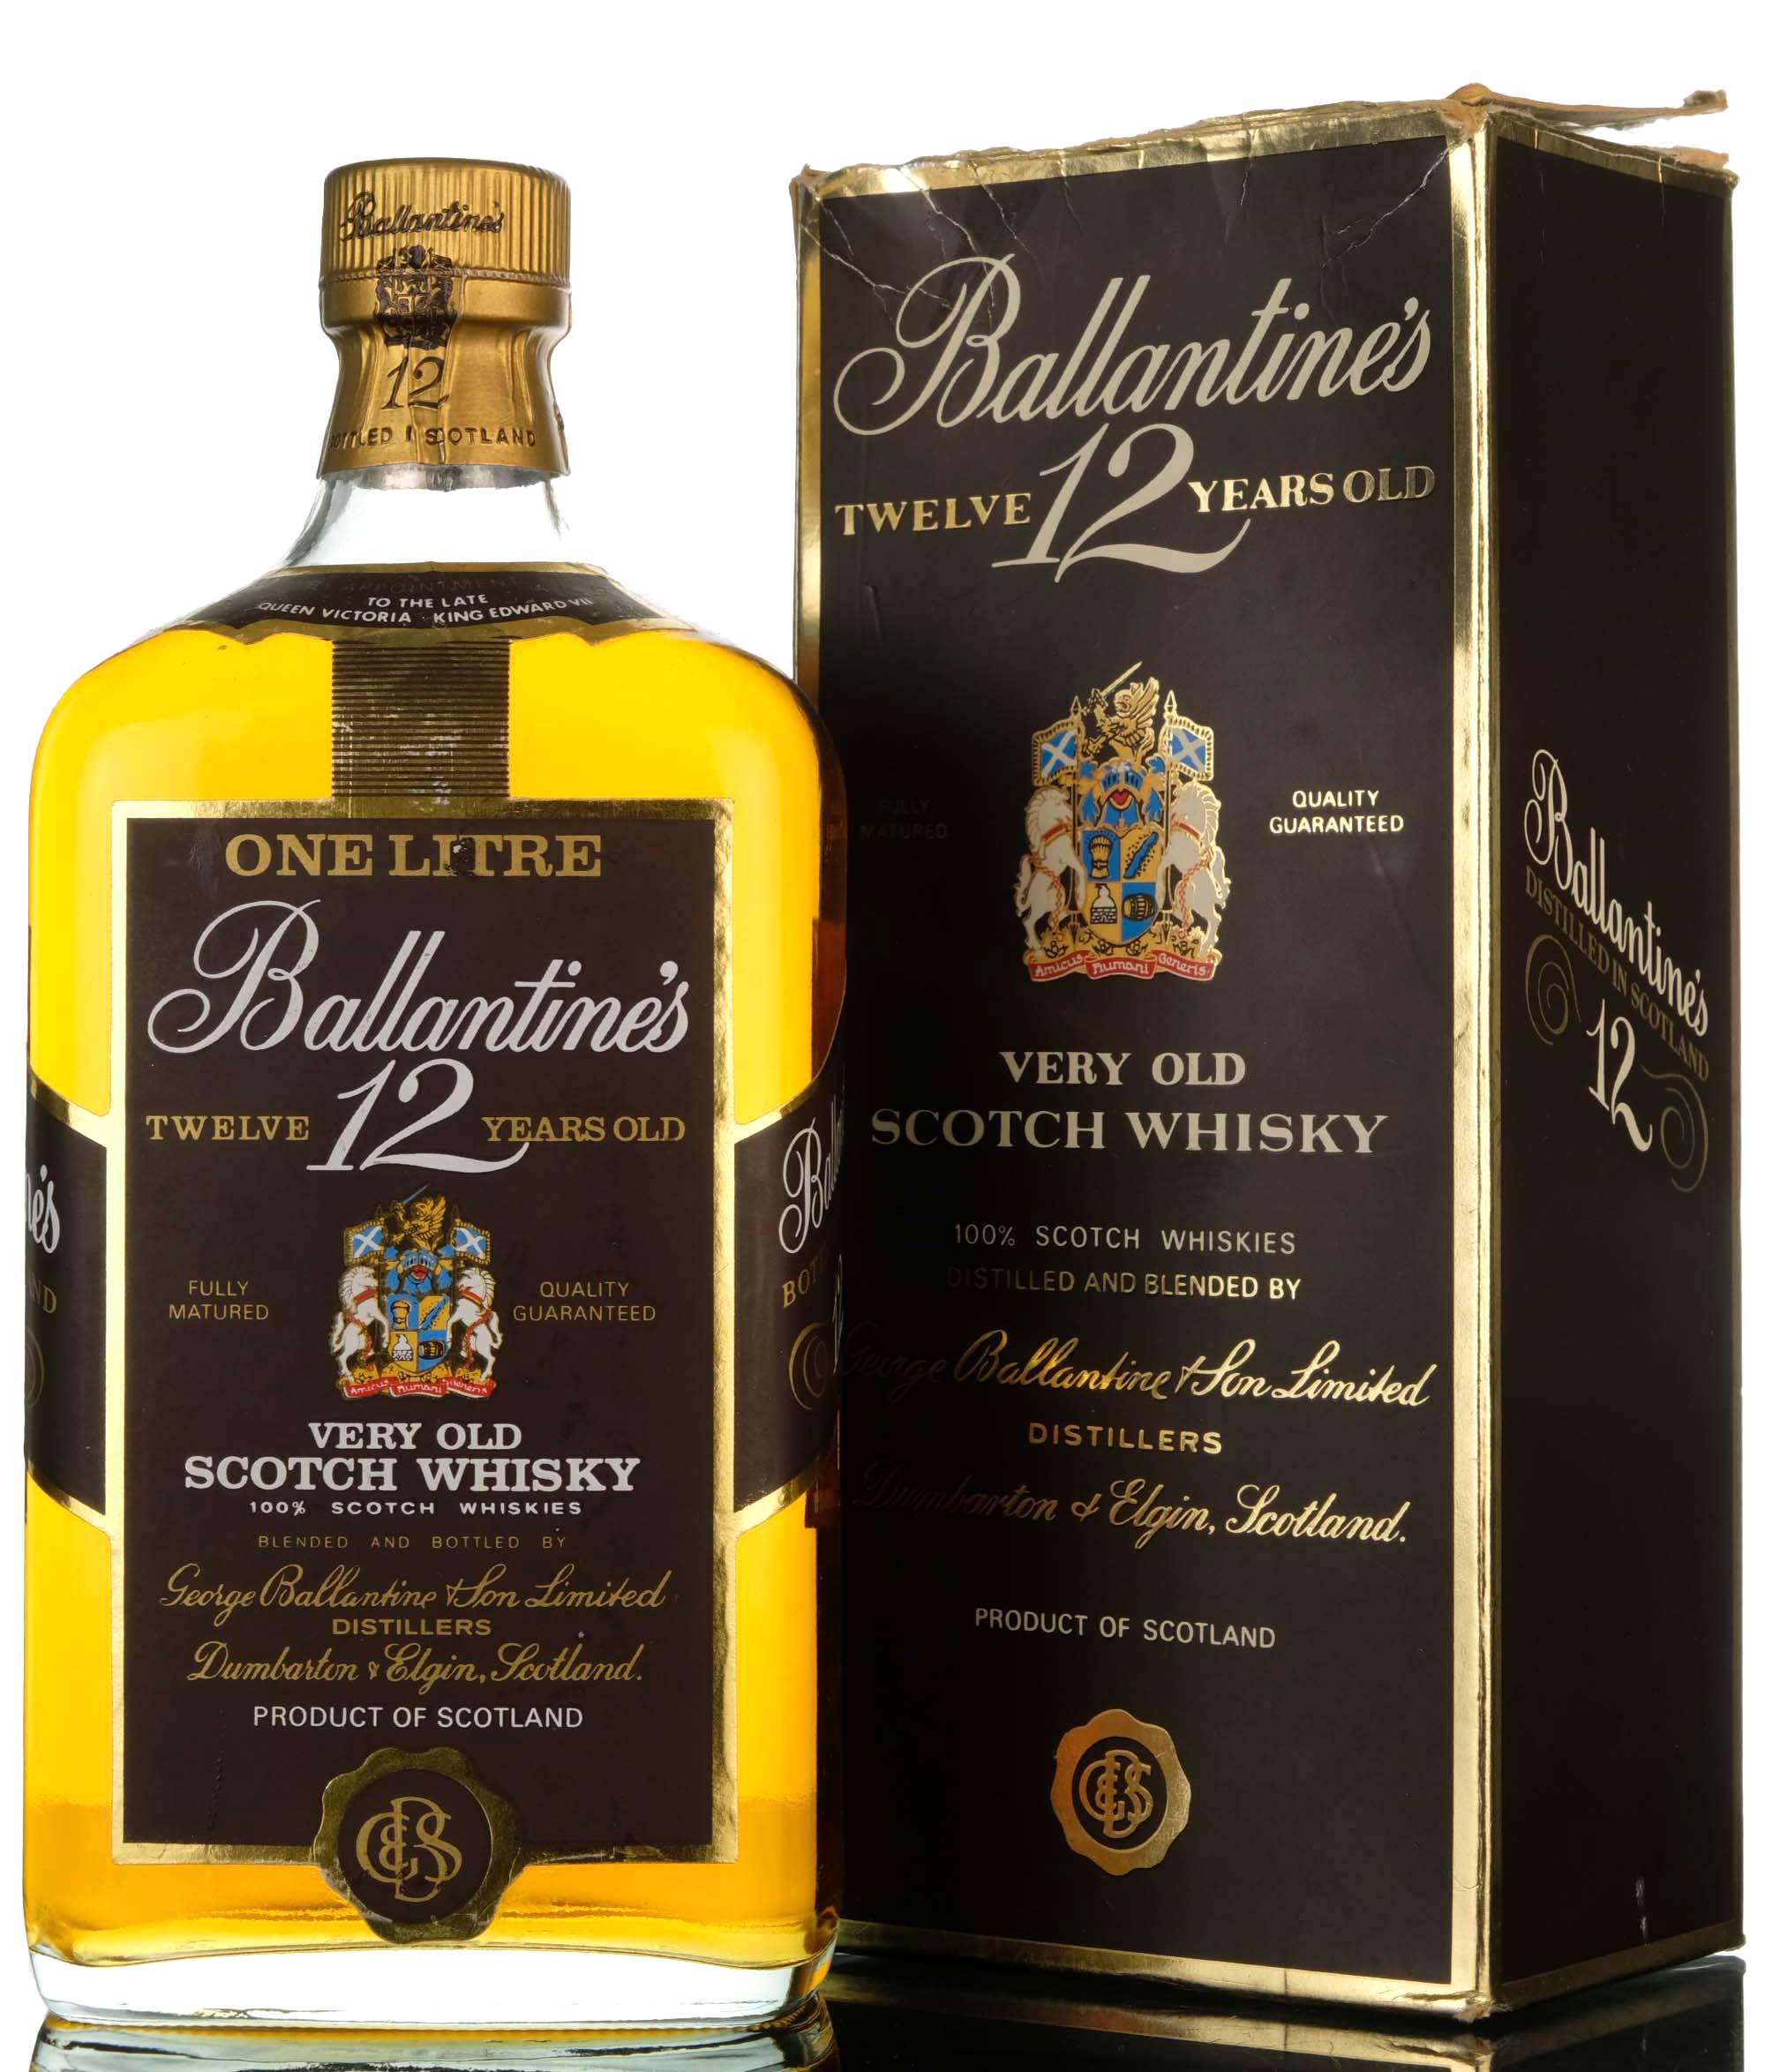 Ballantines 12 Year Old - 1980s - 1 Litre